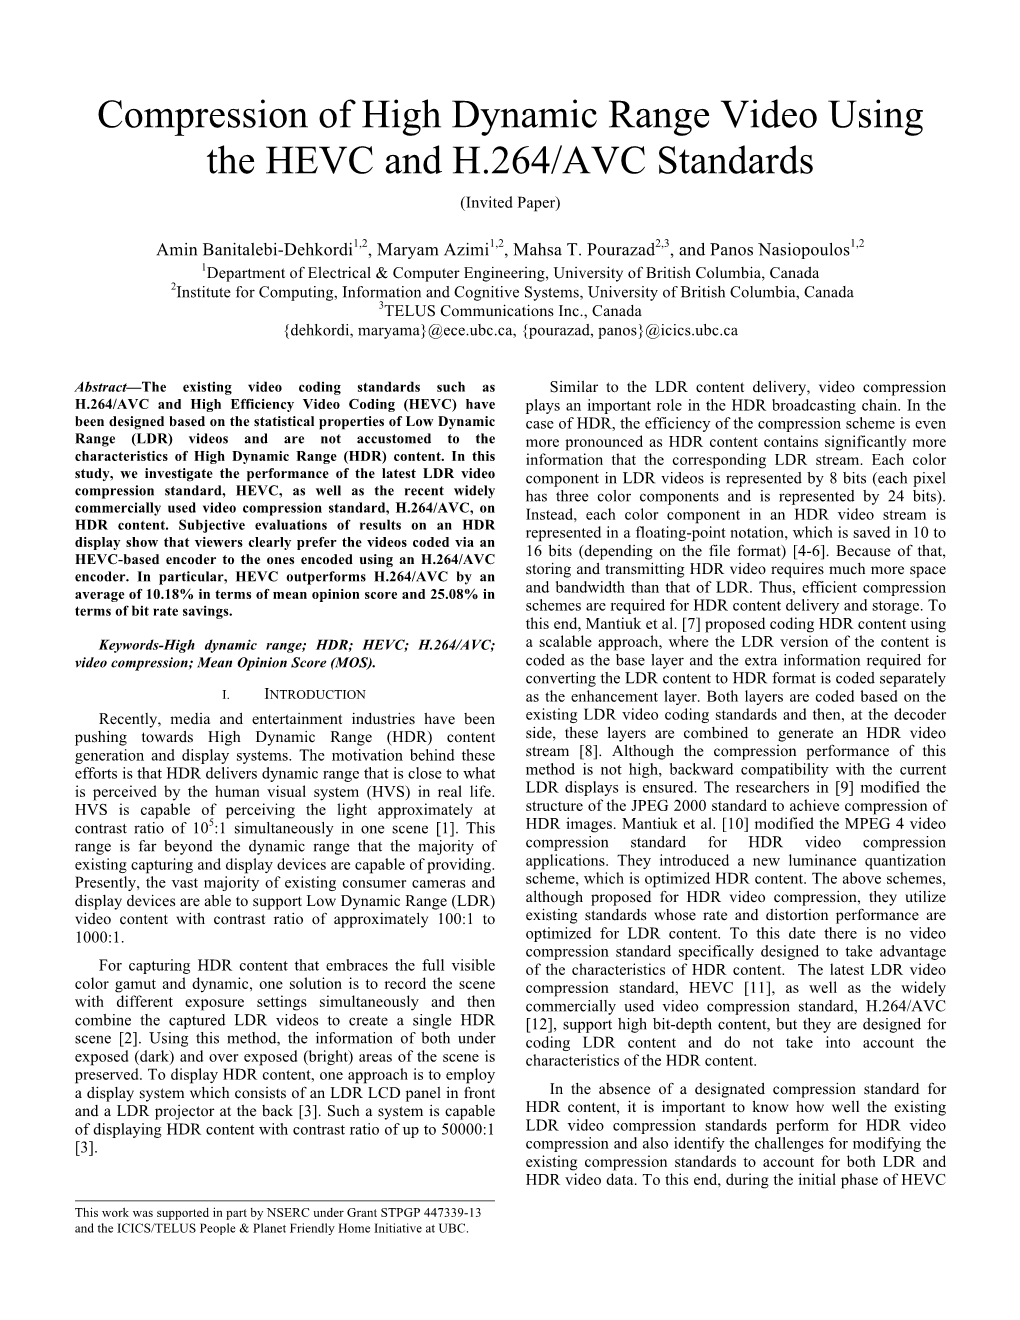 Compression of High Dynamic Range Video Using the HEVC and H.264/AVC Standards (Invited Paper)